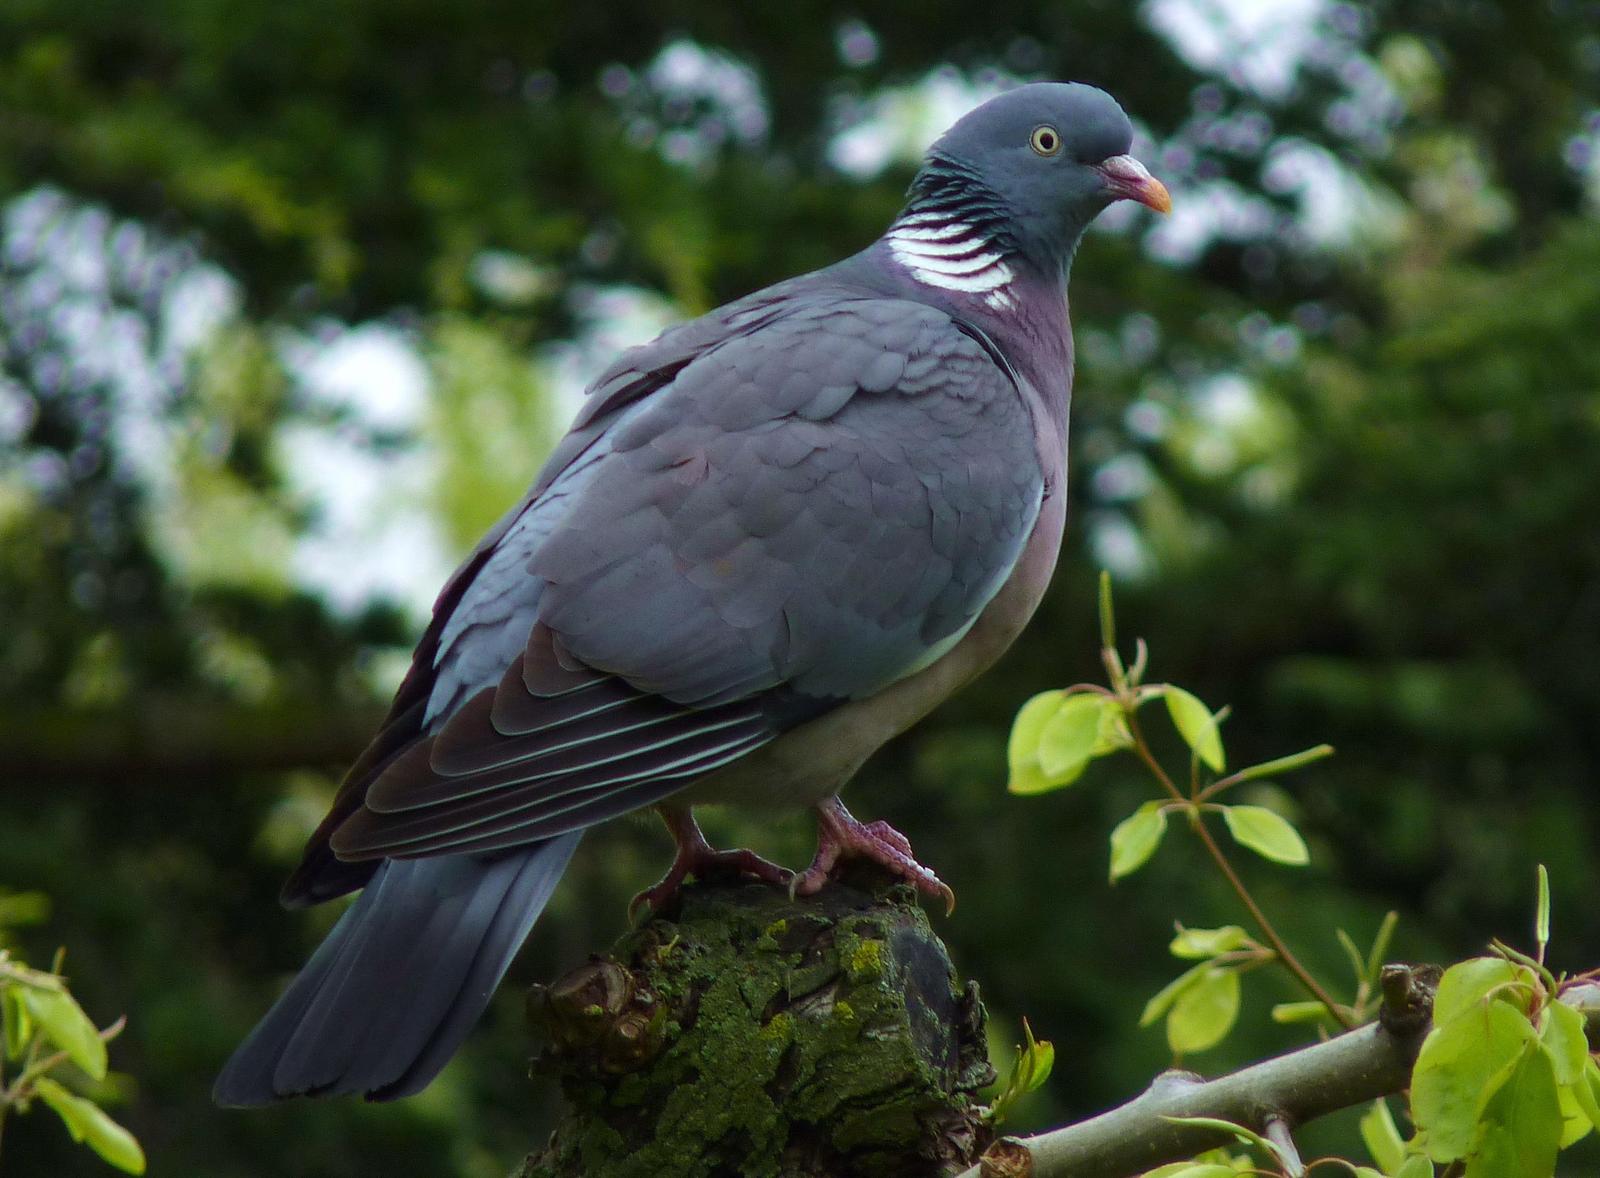 Common Wood-Pigeon Photo by Tino Fernandez